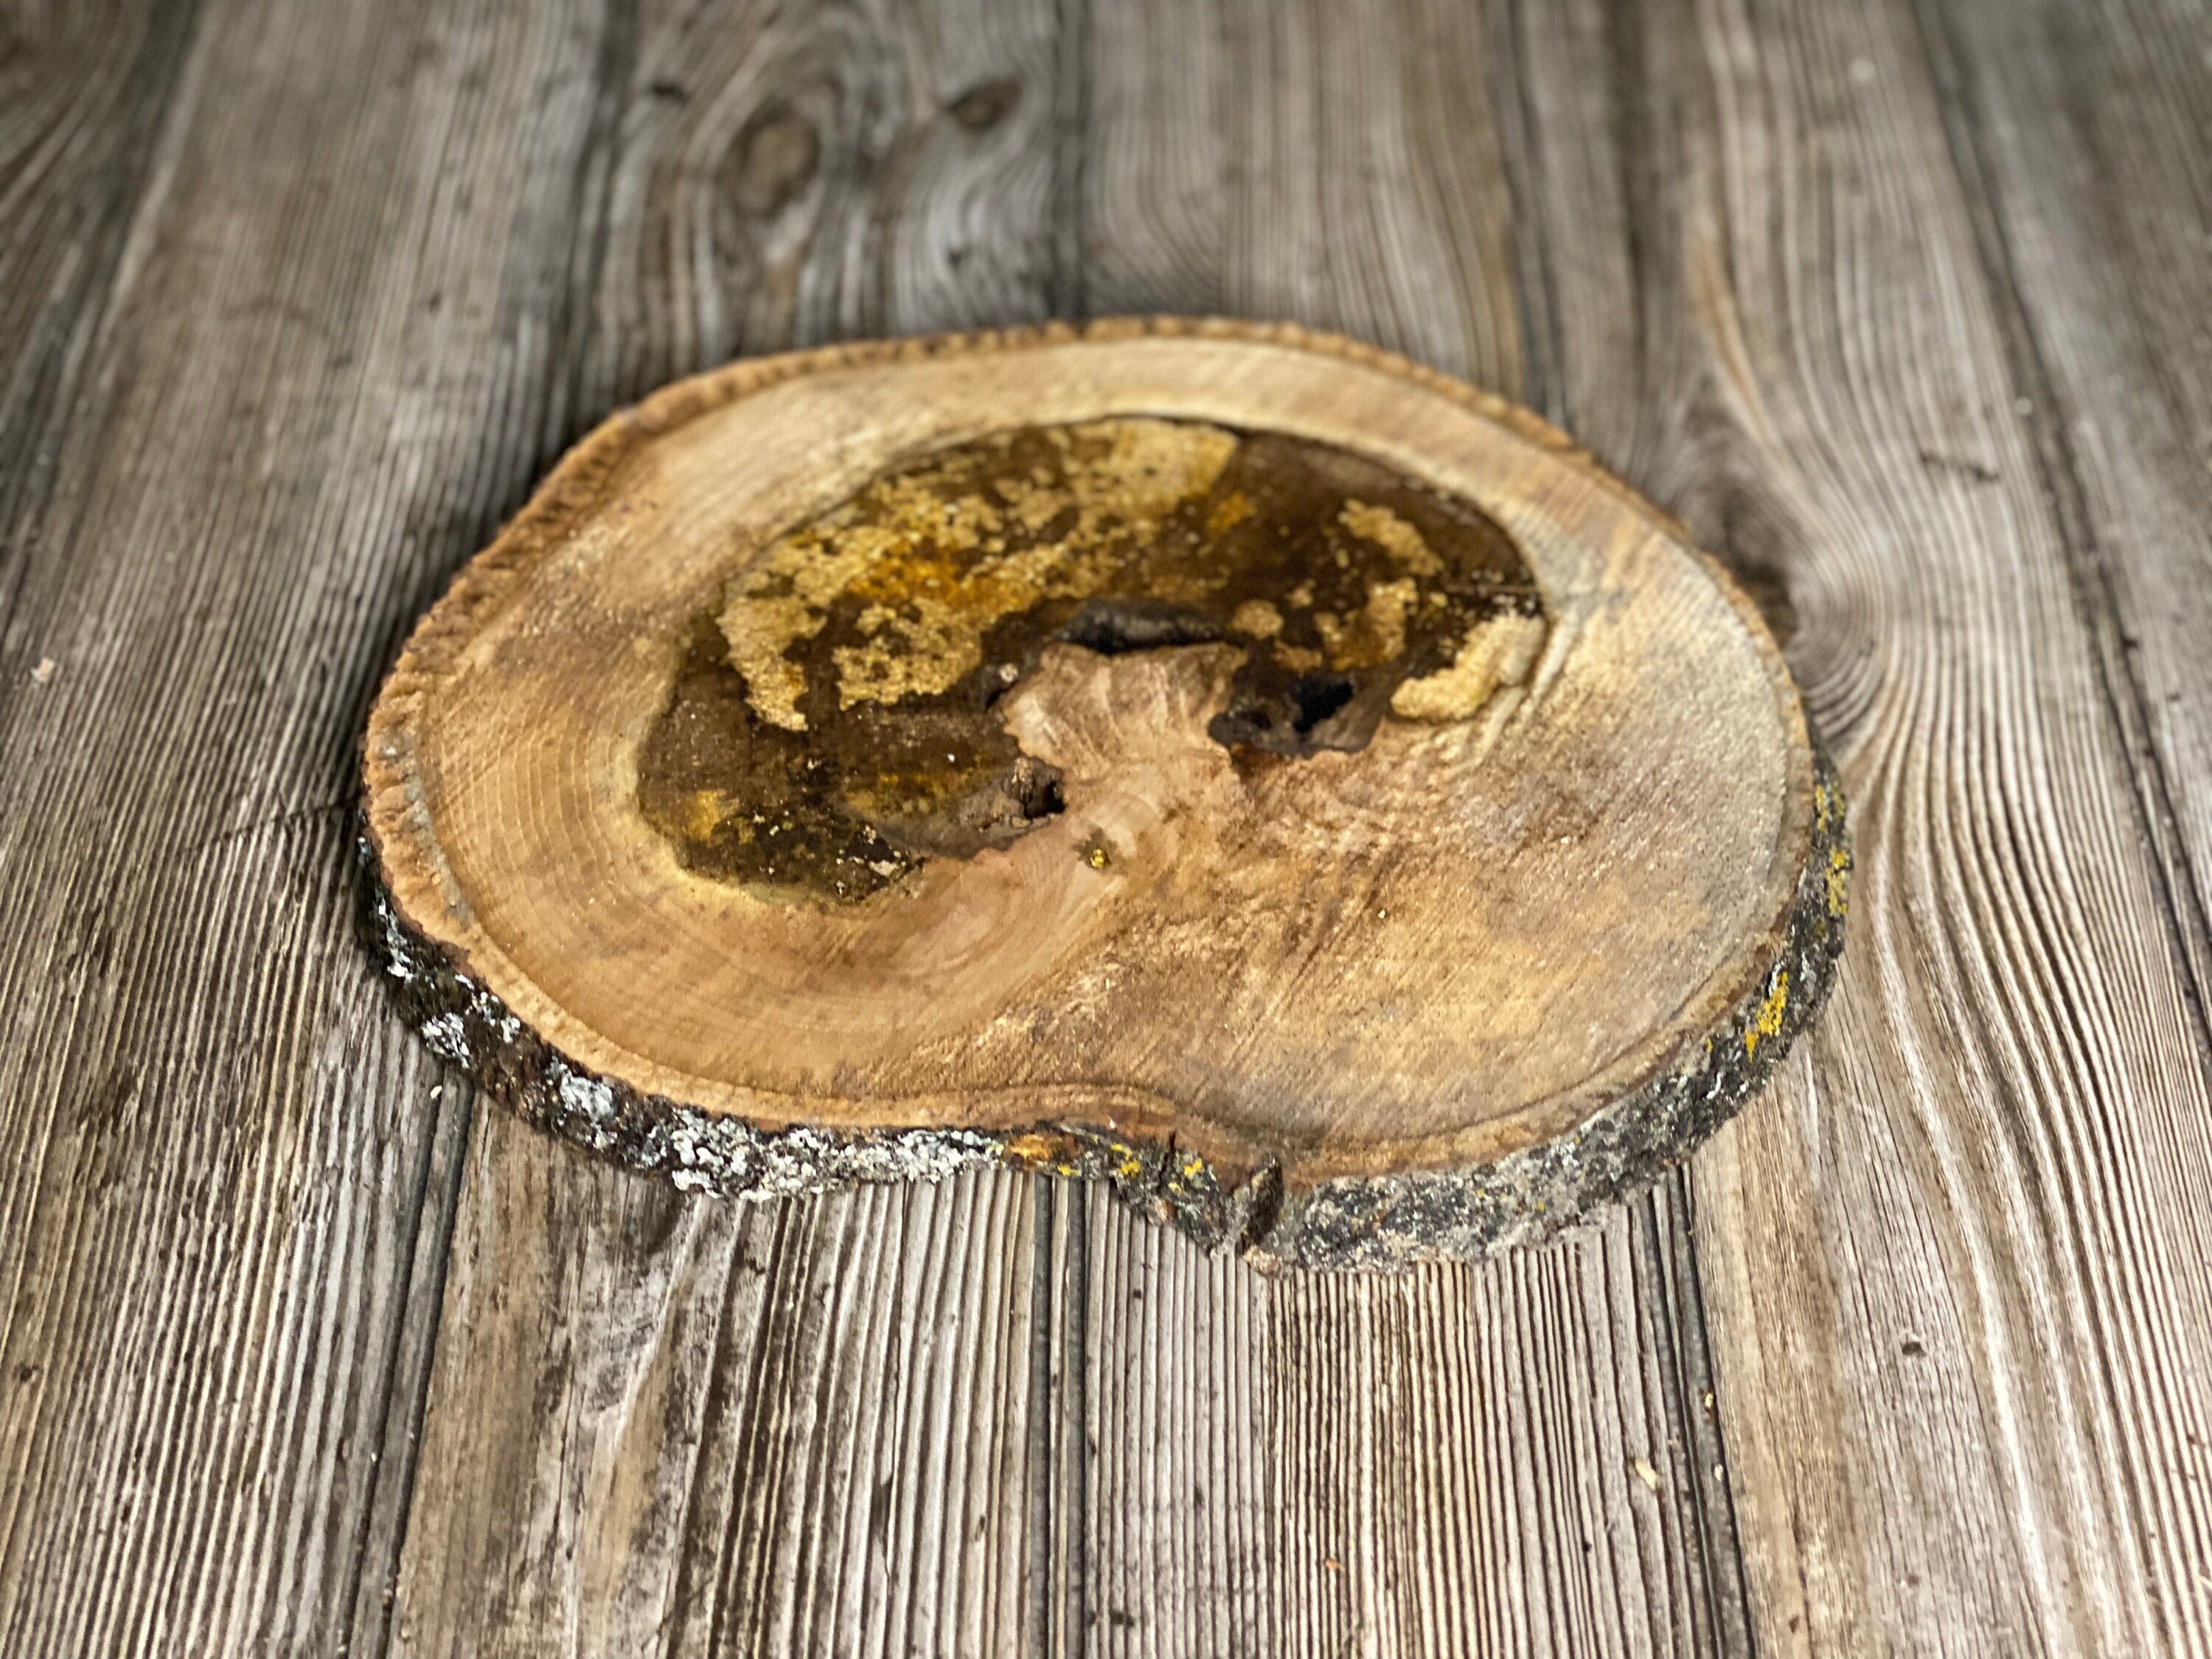 Hickory Burl Slice, Approximately 10 Inches Long by 8.5 Inches Wide and 3/4 Inch Thick